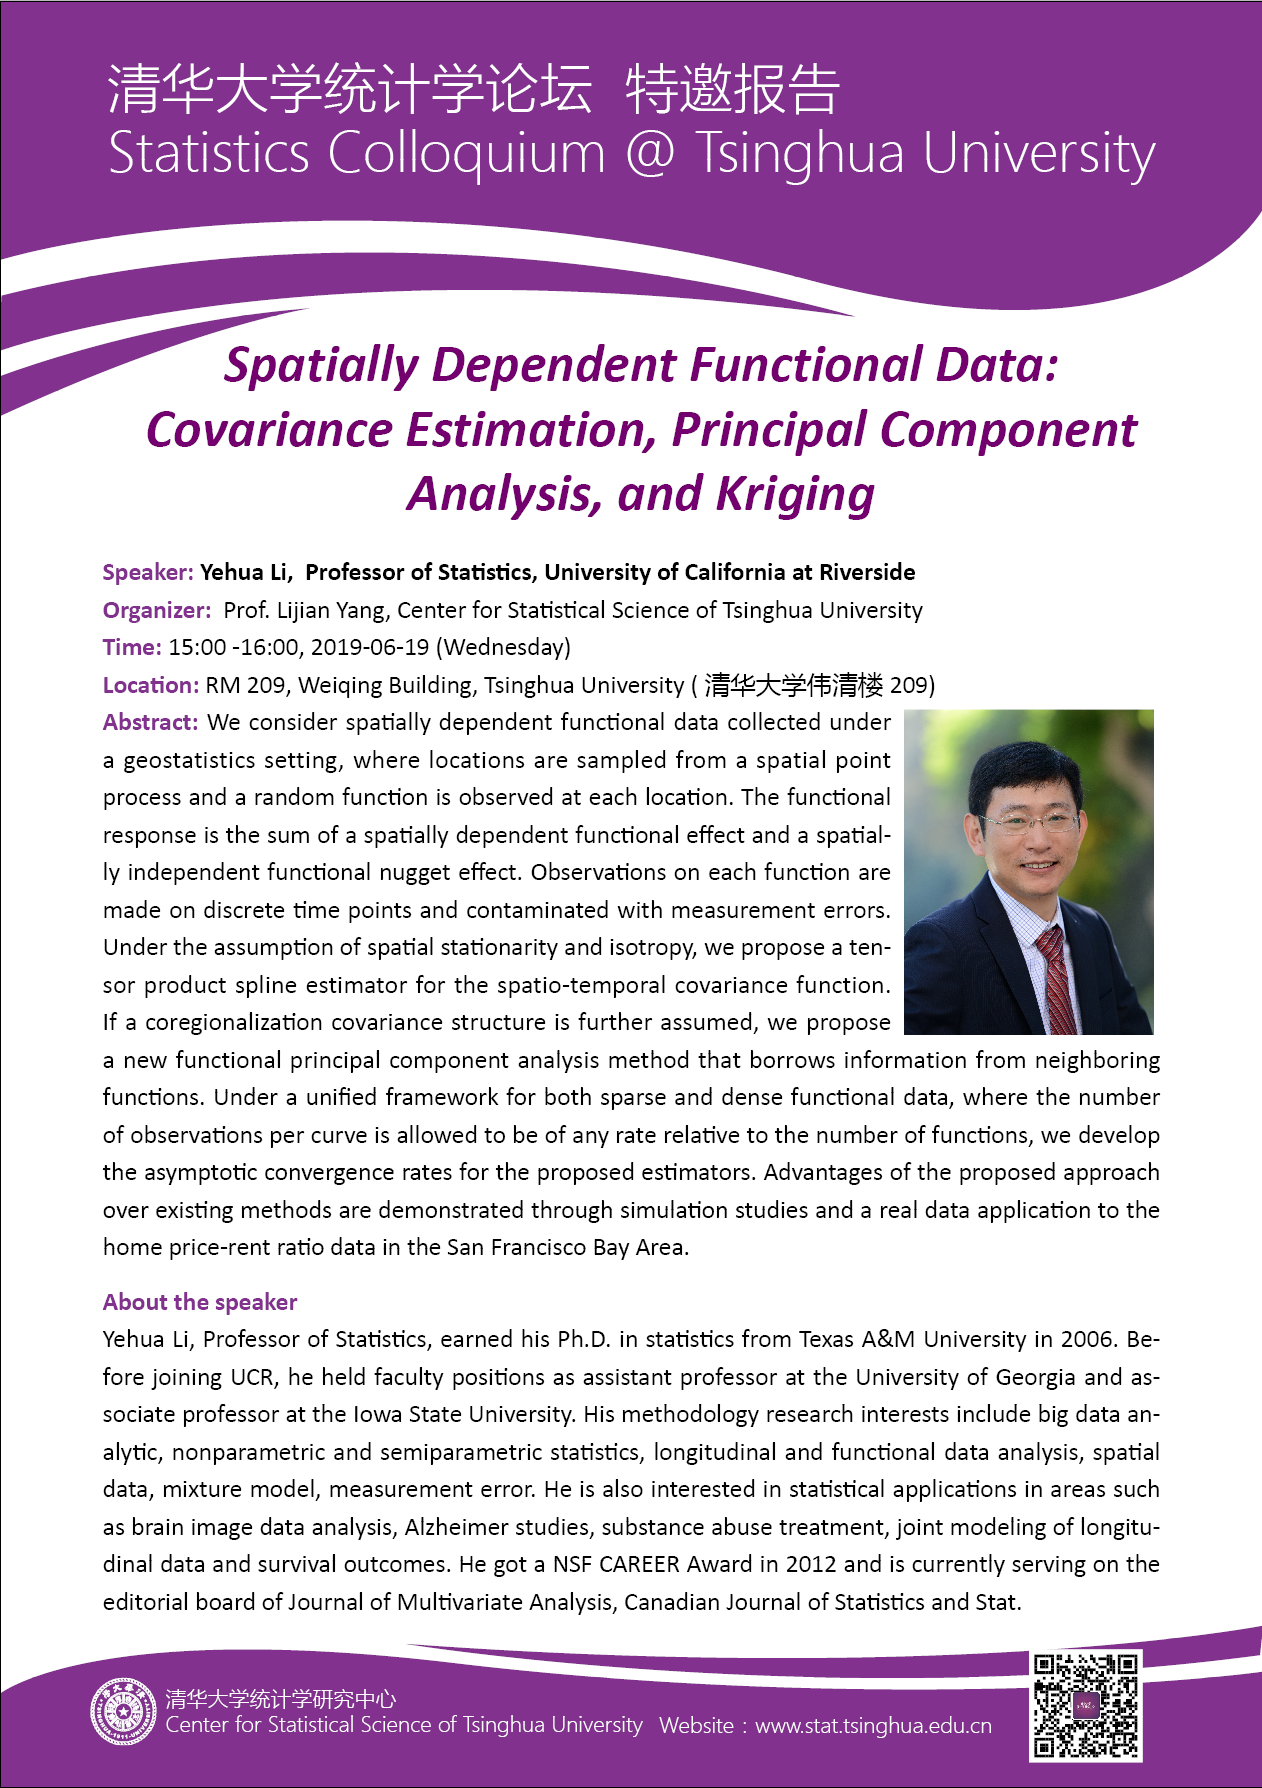 Spatially Dependent Functional Data: Covariance Estimation, Principal Component Analysis, and Kriging